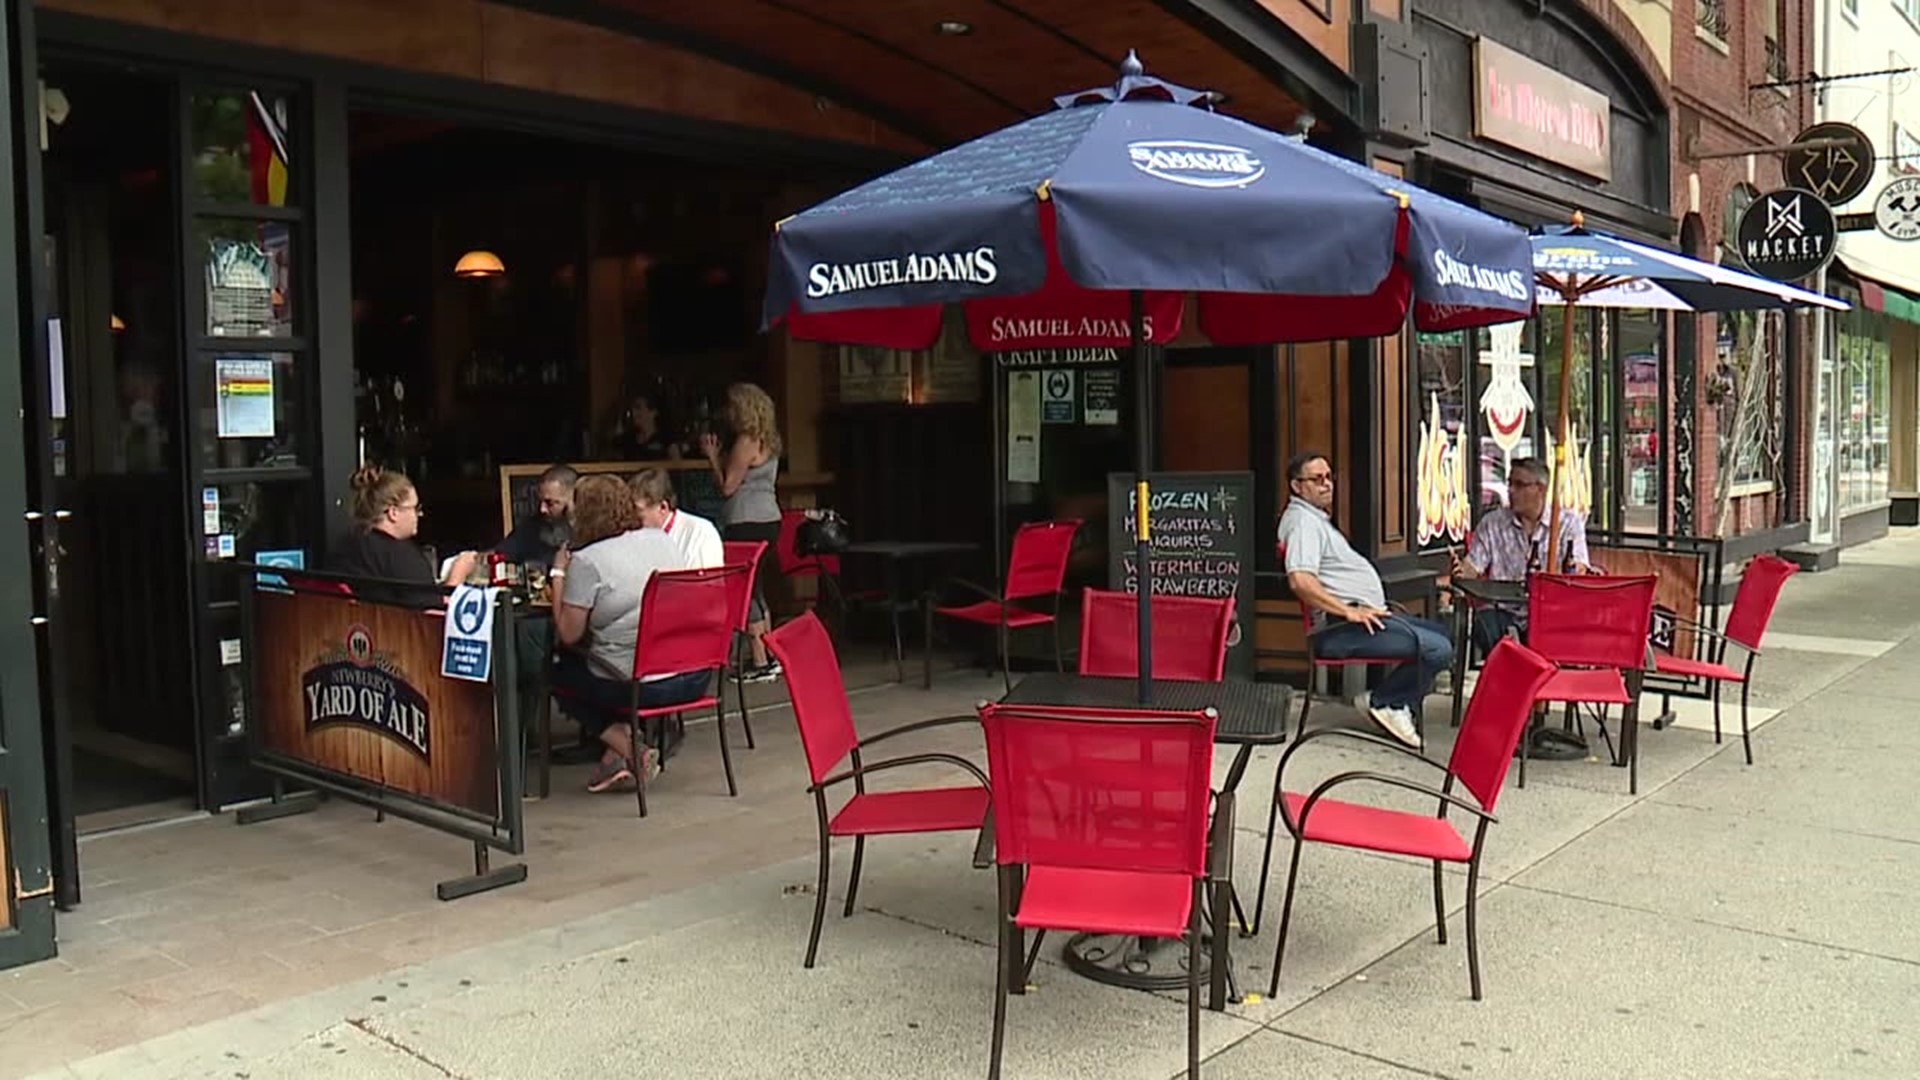 Restaurants that started serving alcohol outside during the pandemic are no longer allowed to do so, according to the state.